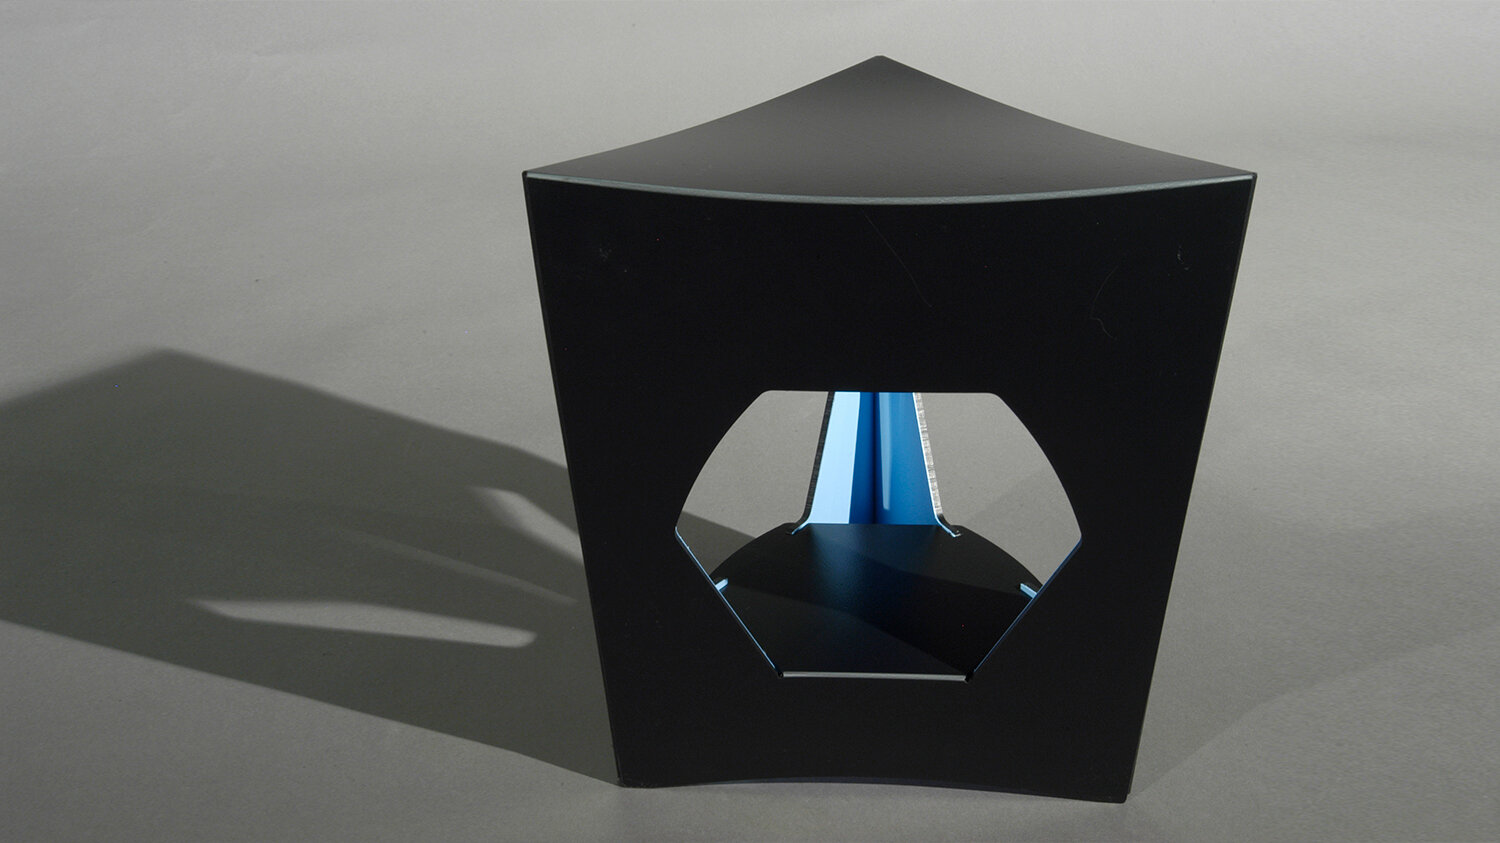 Blue-Marmalade-Low-cut-living-room-recycled-plastic-black-stool-coffee-table-black-made-to-order-recyclable-zero-waste.jpg